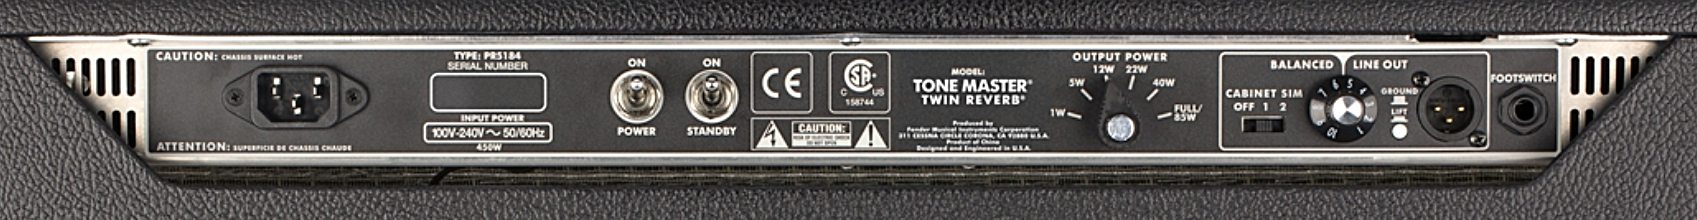 Fender Tone Master Twin Reverb 200w 2x12 - Electric guitar combo amp - Variation 4